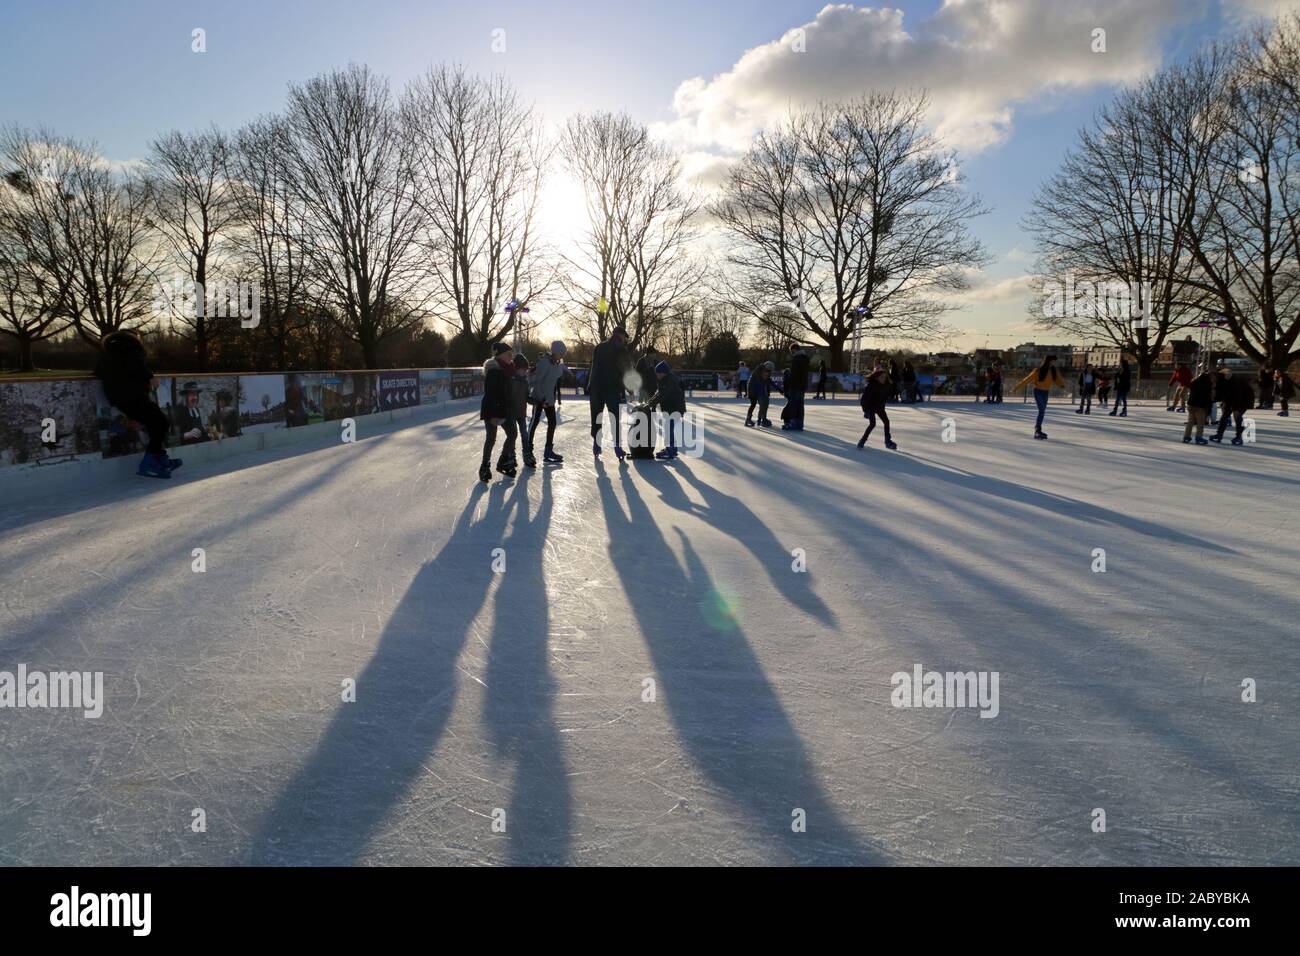 Hampton Court, SW London, UK. 29th Nov, 2019. In the build up to the festive period, the ice rink is up and running at Hampton Court Palace in South West London, England. On a bright but chilly day the skaters had fun on the ice. Credit: Julia Gavin/Alamy Live News Stock Photo